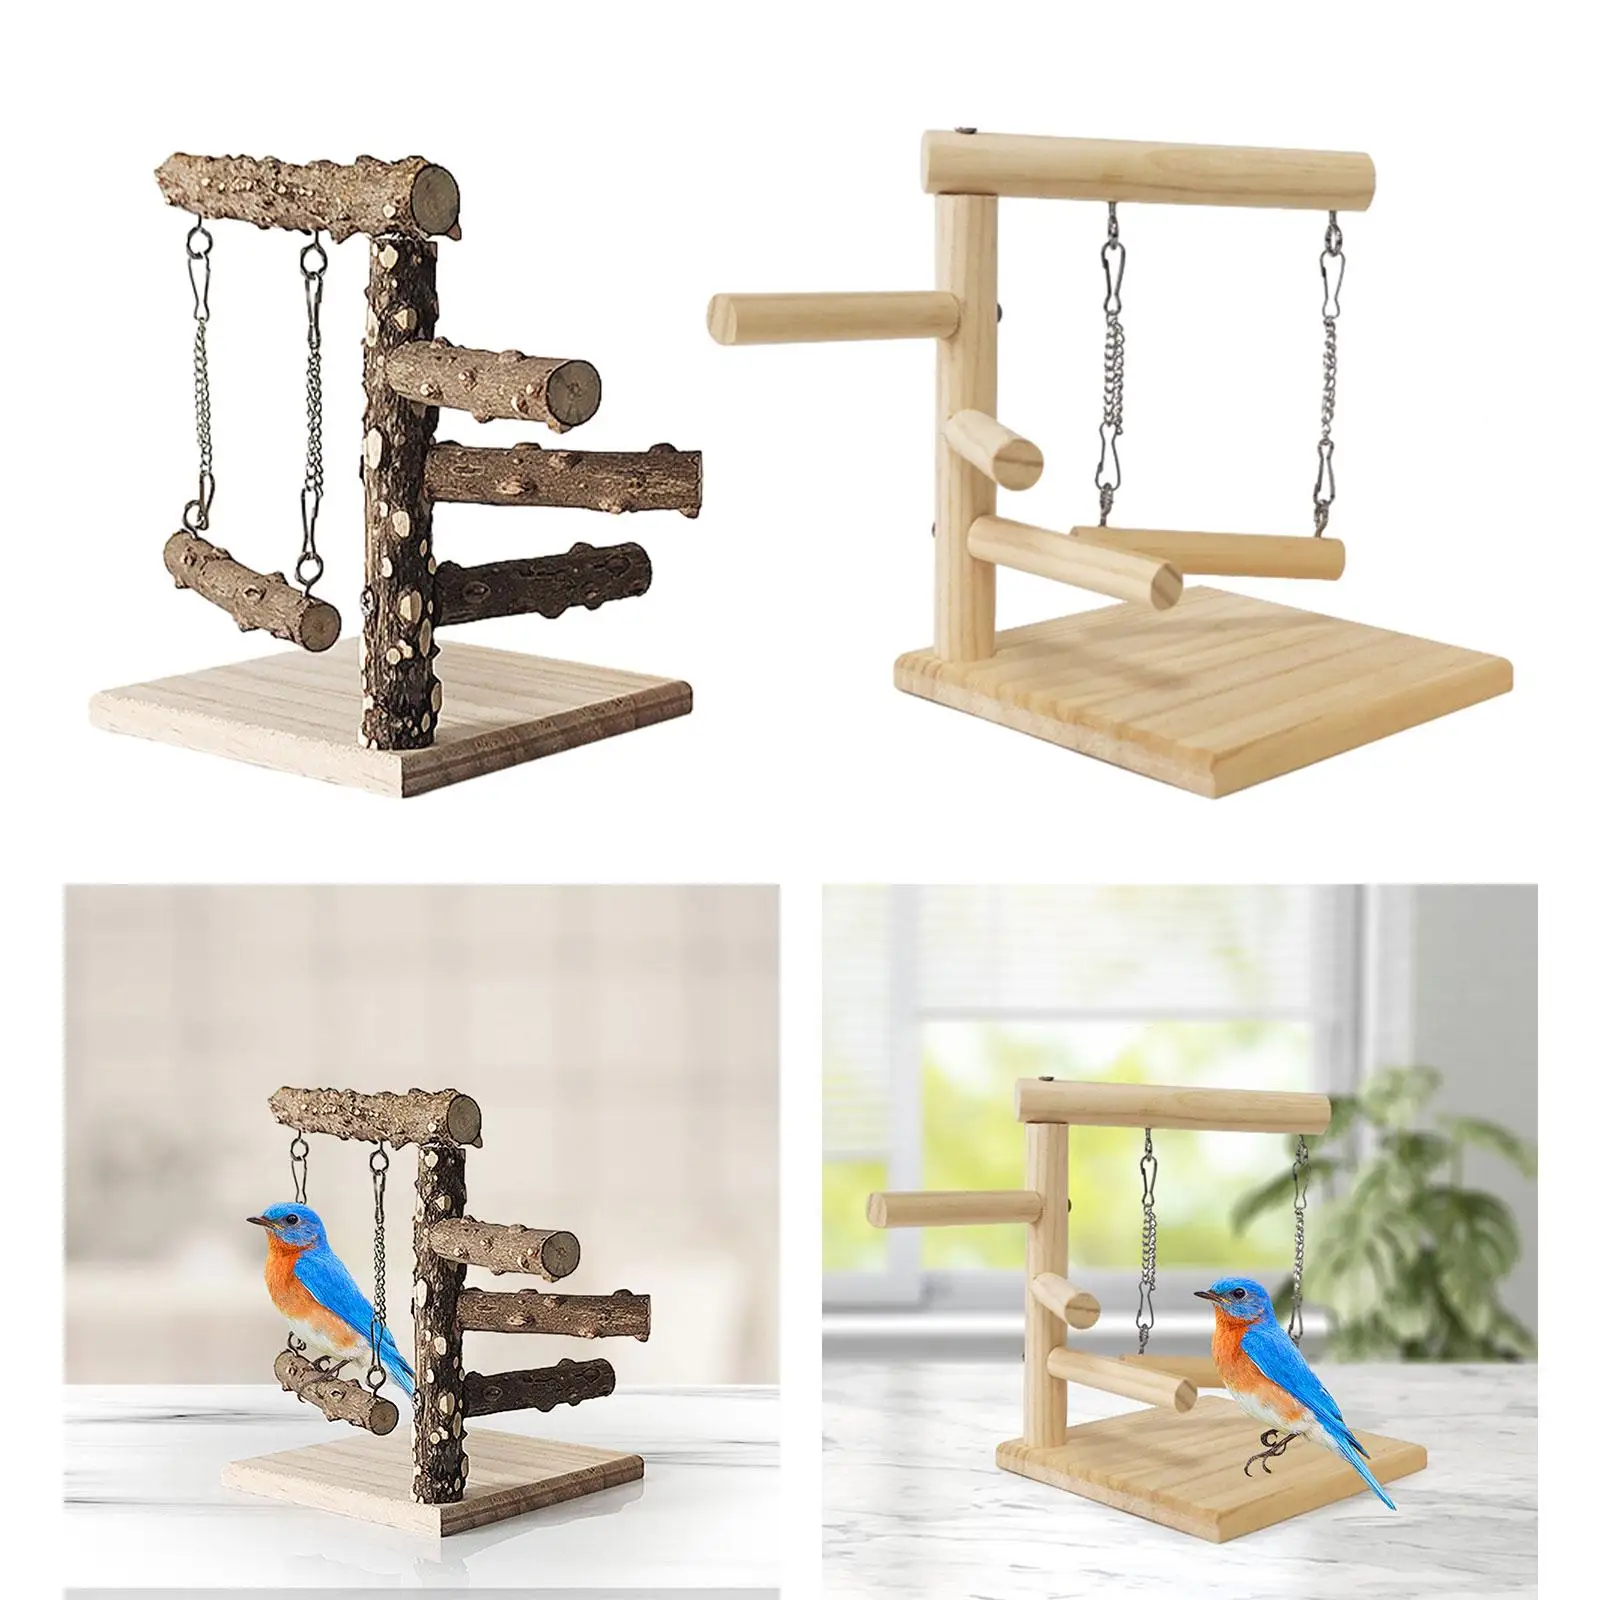 Wooden Perch Playstand Platform Bird Tabletop Training Perch Play Stand for Lovebirds Canaries Cockatiels Parrots Parakeets